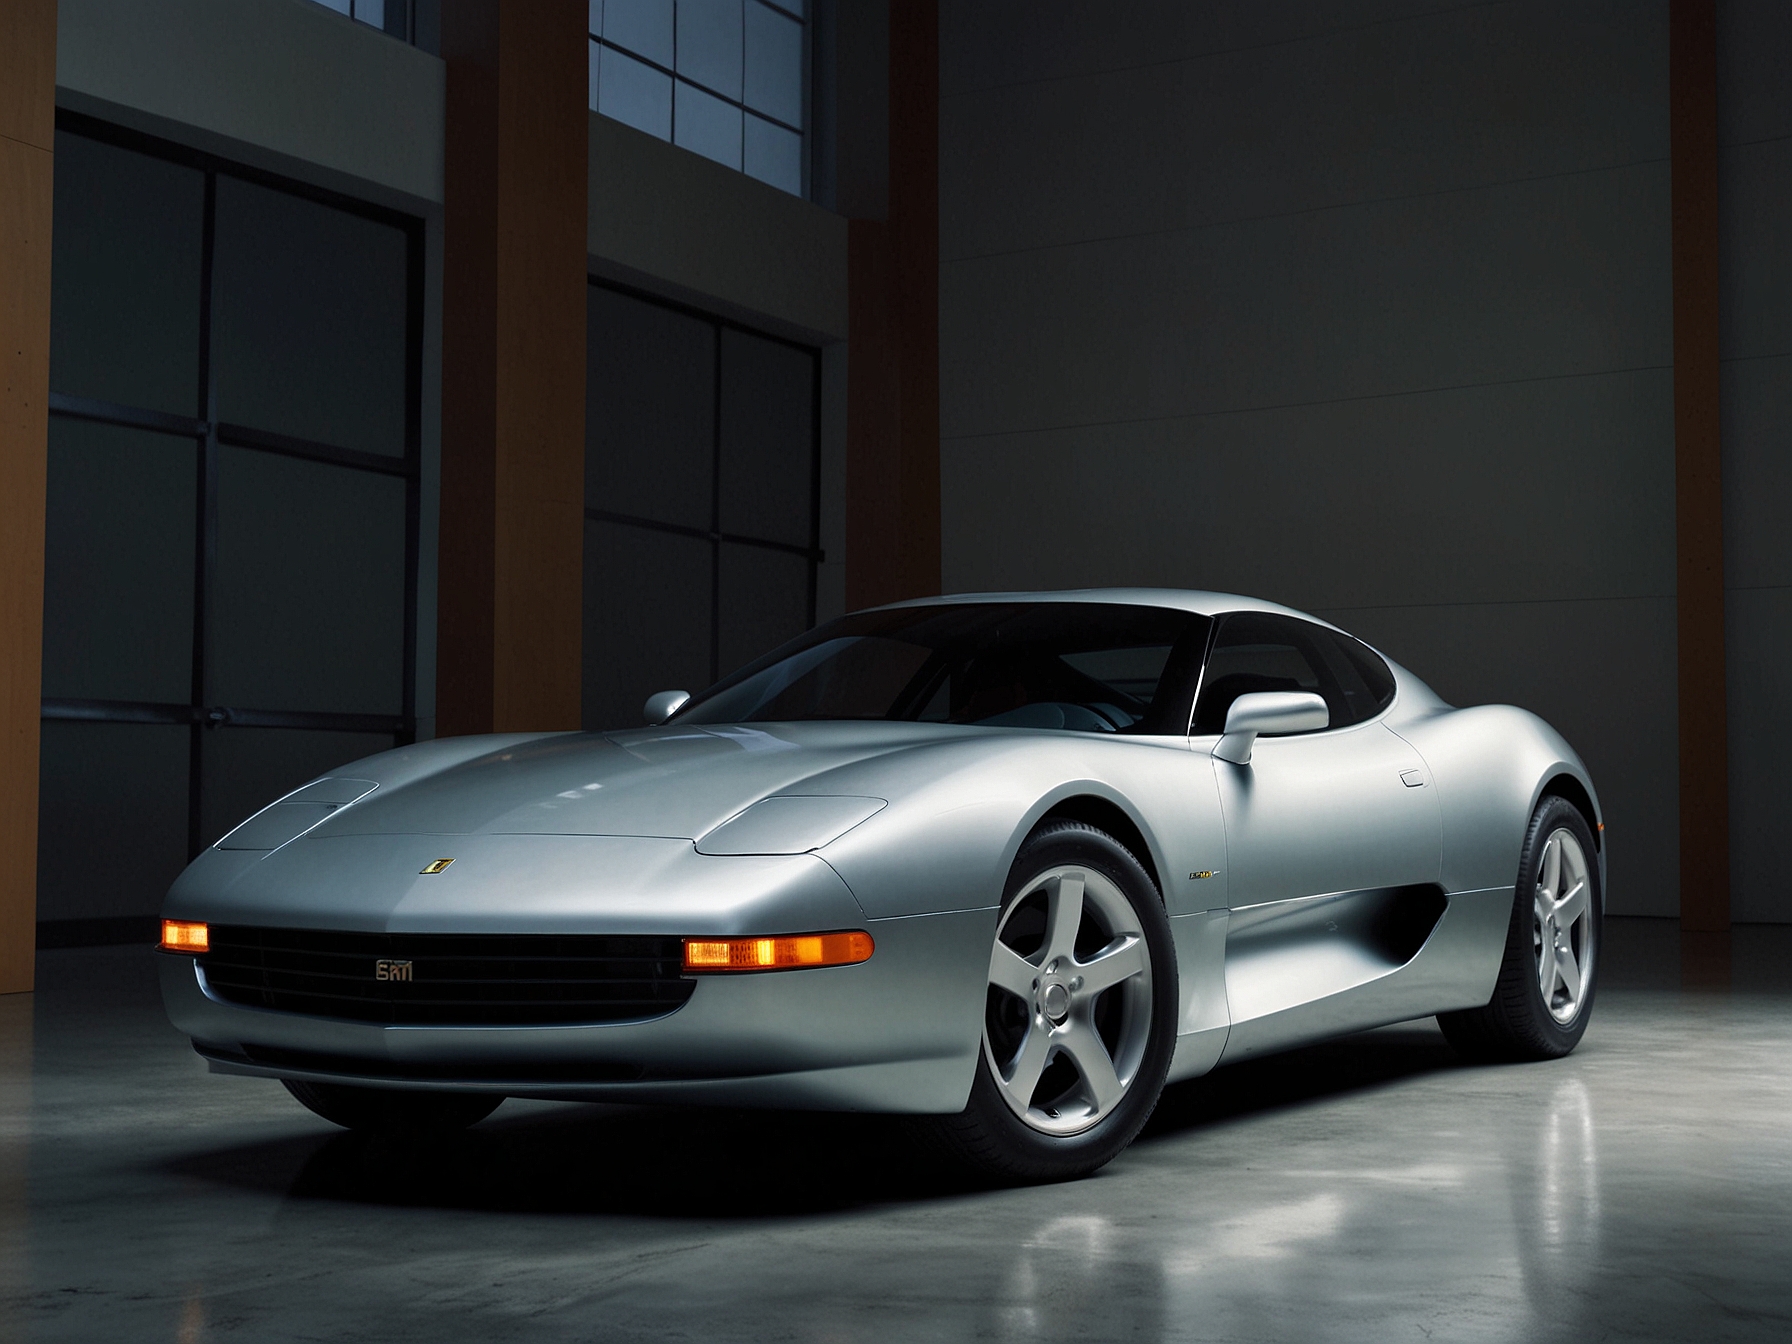 A sleek and aerodynamic GM EV1, the pioneering electric vehicle from 1996, highlighted in a showroom. The car flaunts its compact, futuristic design that symbolized a shift toward clean energy in the automotive industry.